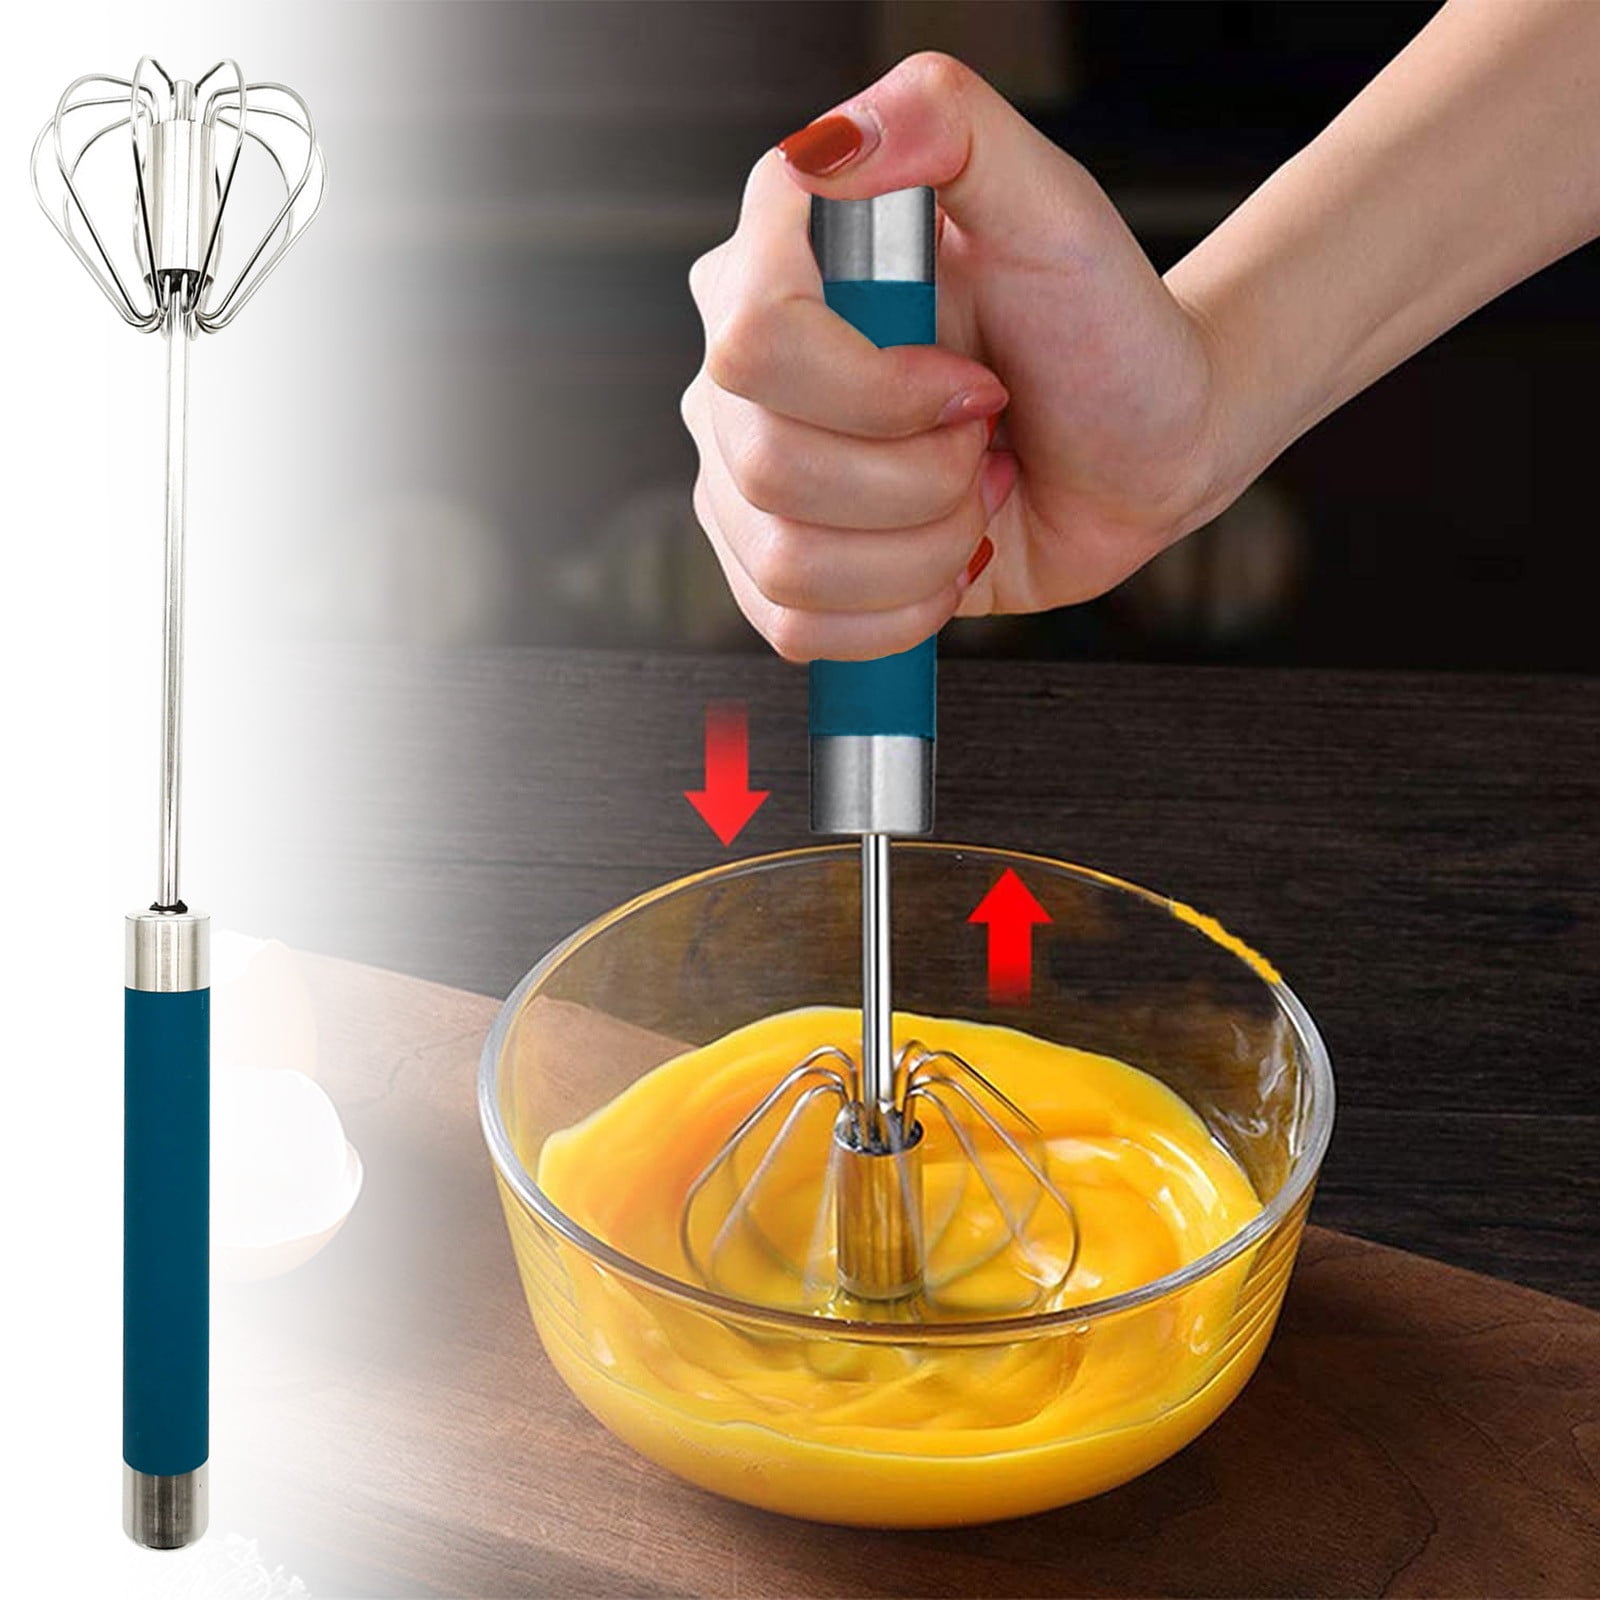 Ycolew Manual Mixer Semi Automatic Whisk Egg Scrambler, Multifunctional Egg  Beater Egg Mixer, Stainless Steel Hand Mixer for Mixing Eggs & Drinks 